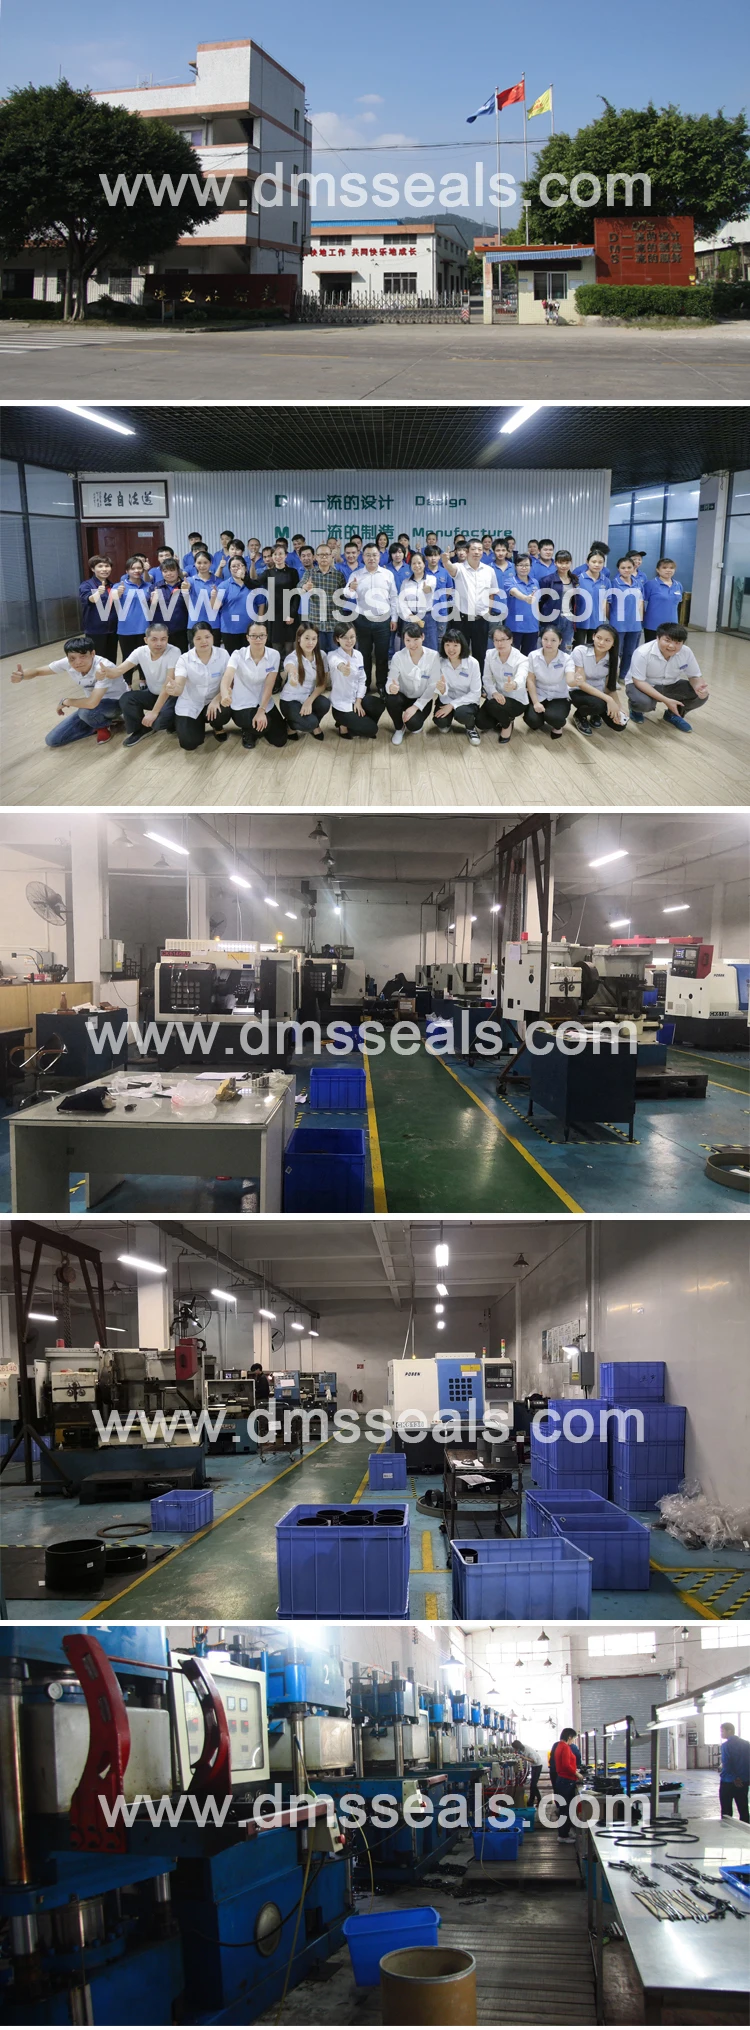 DMS Seals cylinder wiper seal company for hydraulic cylinder